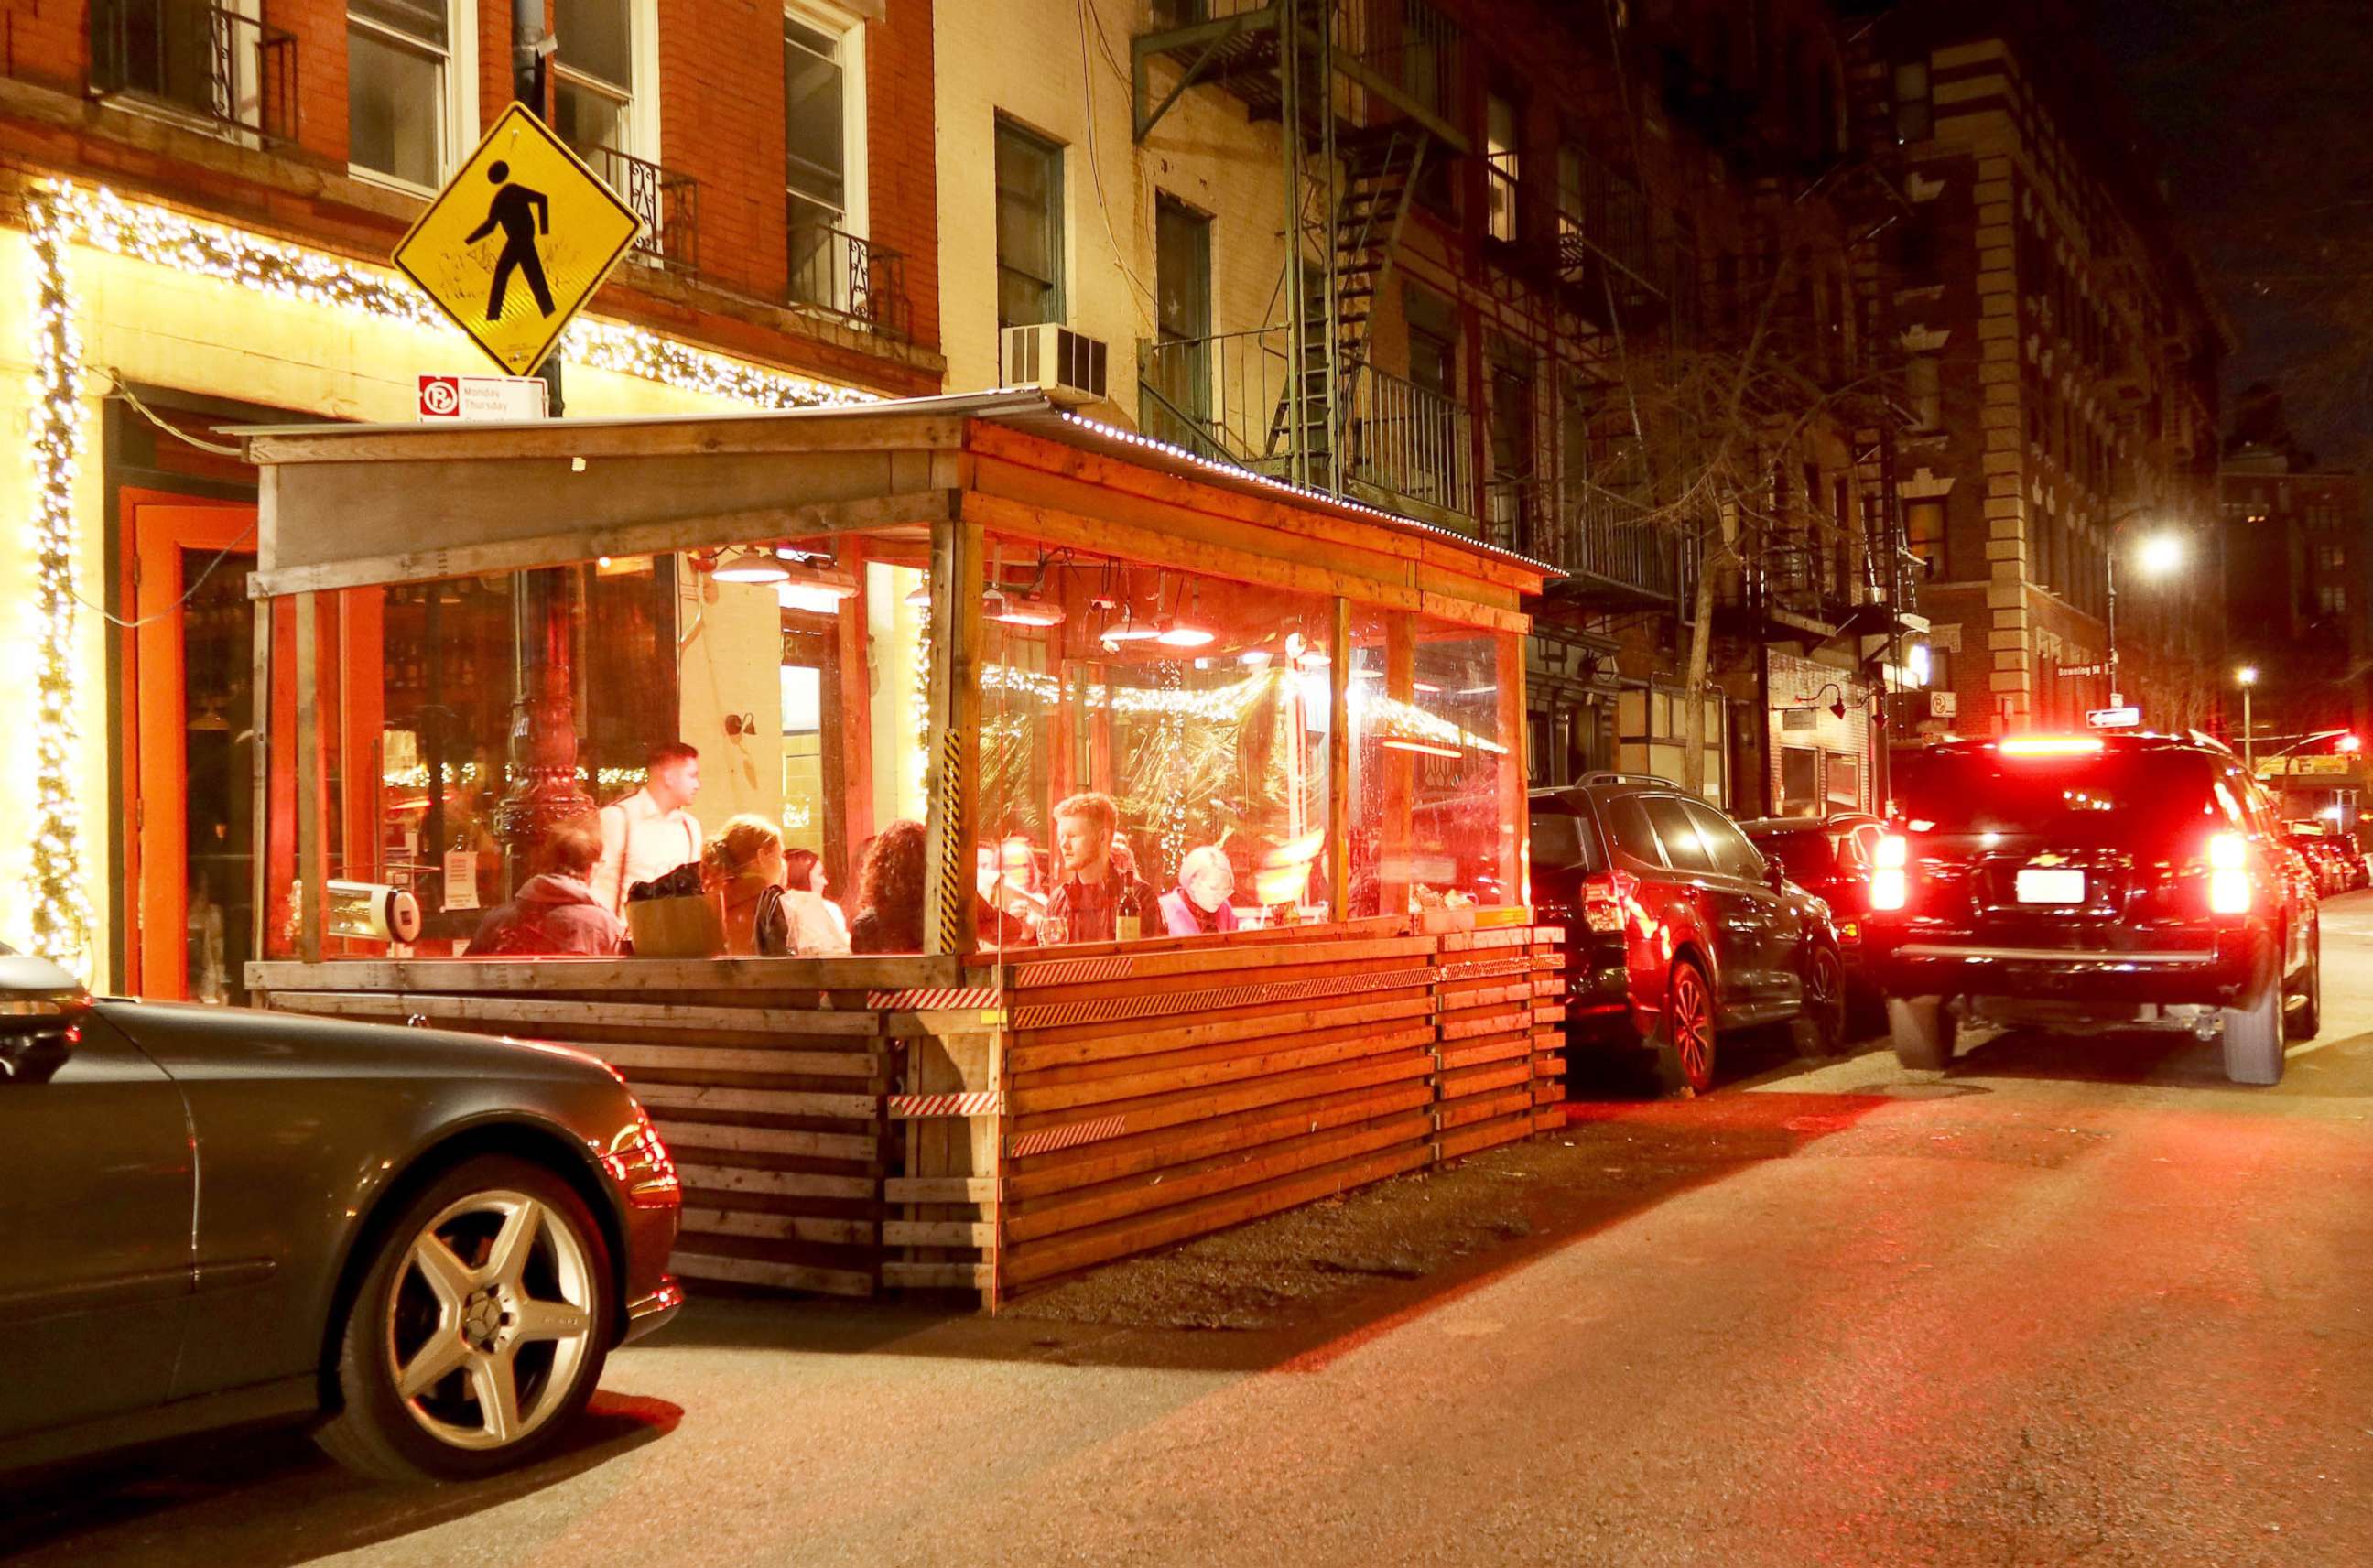 PHOTO: People eat dinner in an outdoor sidewalk shed at a restaurant on Bedford Street in Greenwich Village area of New York, Dec. 17, 2021.